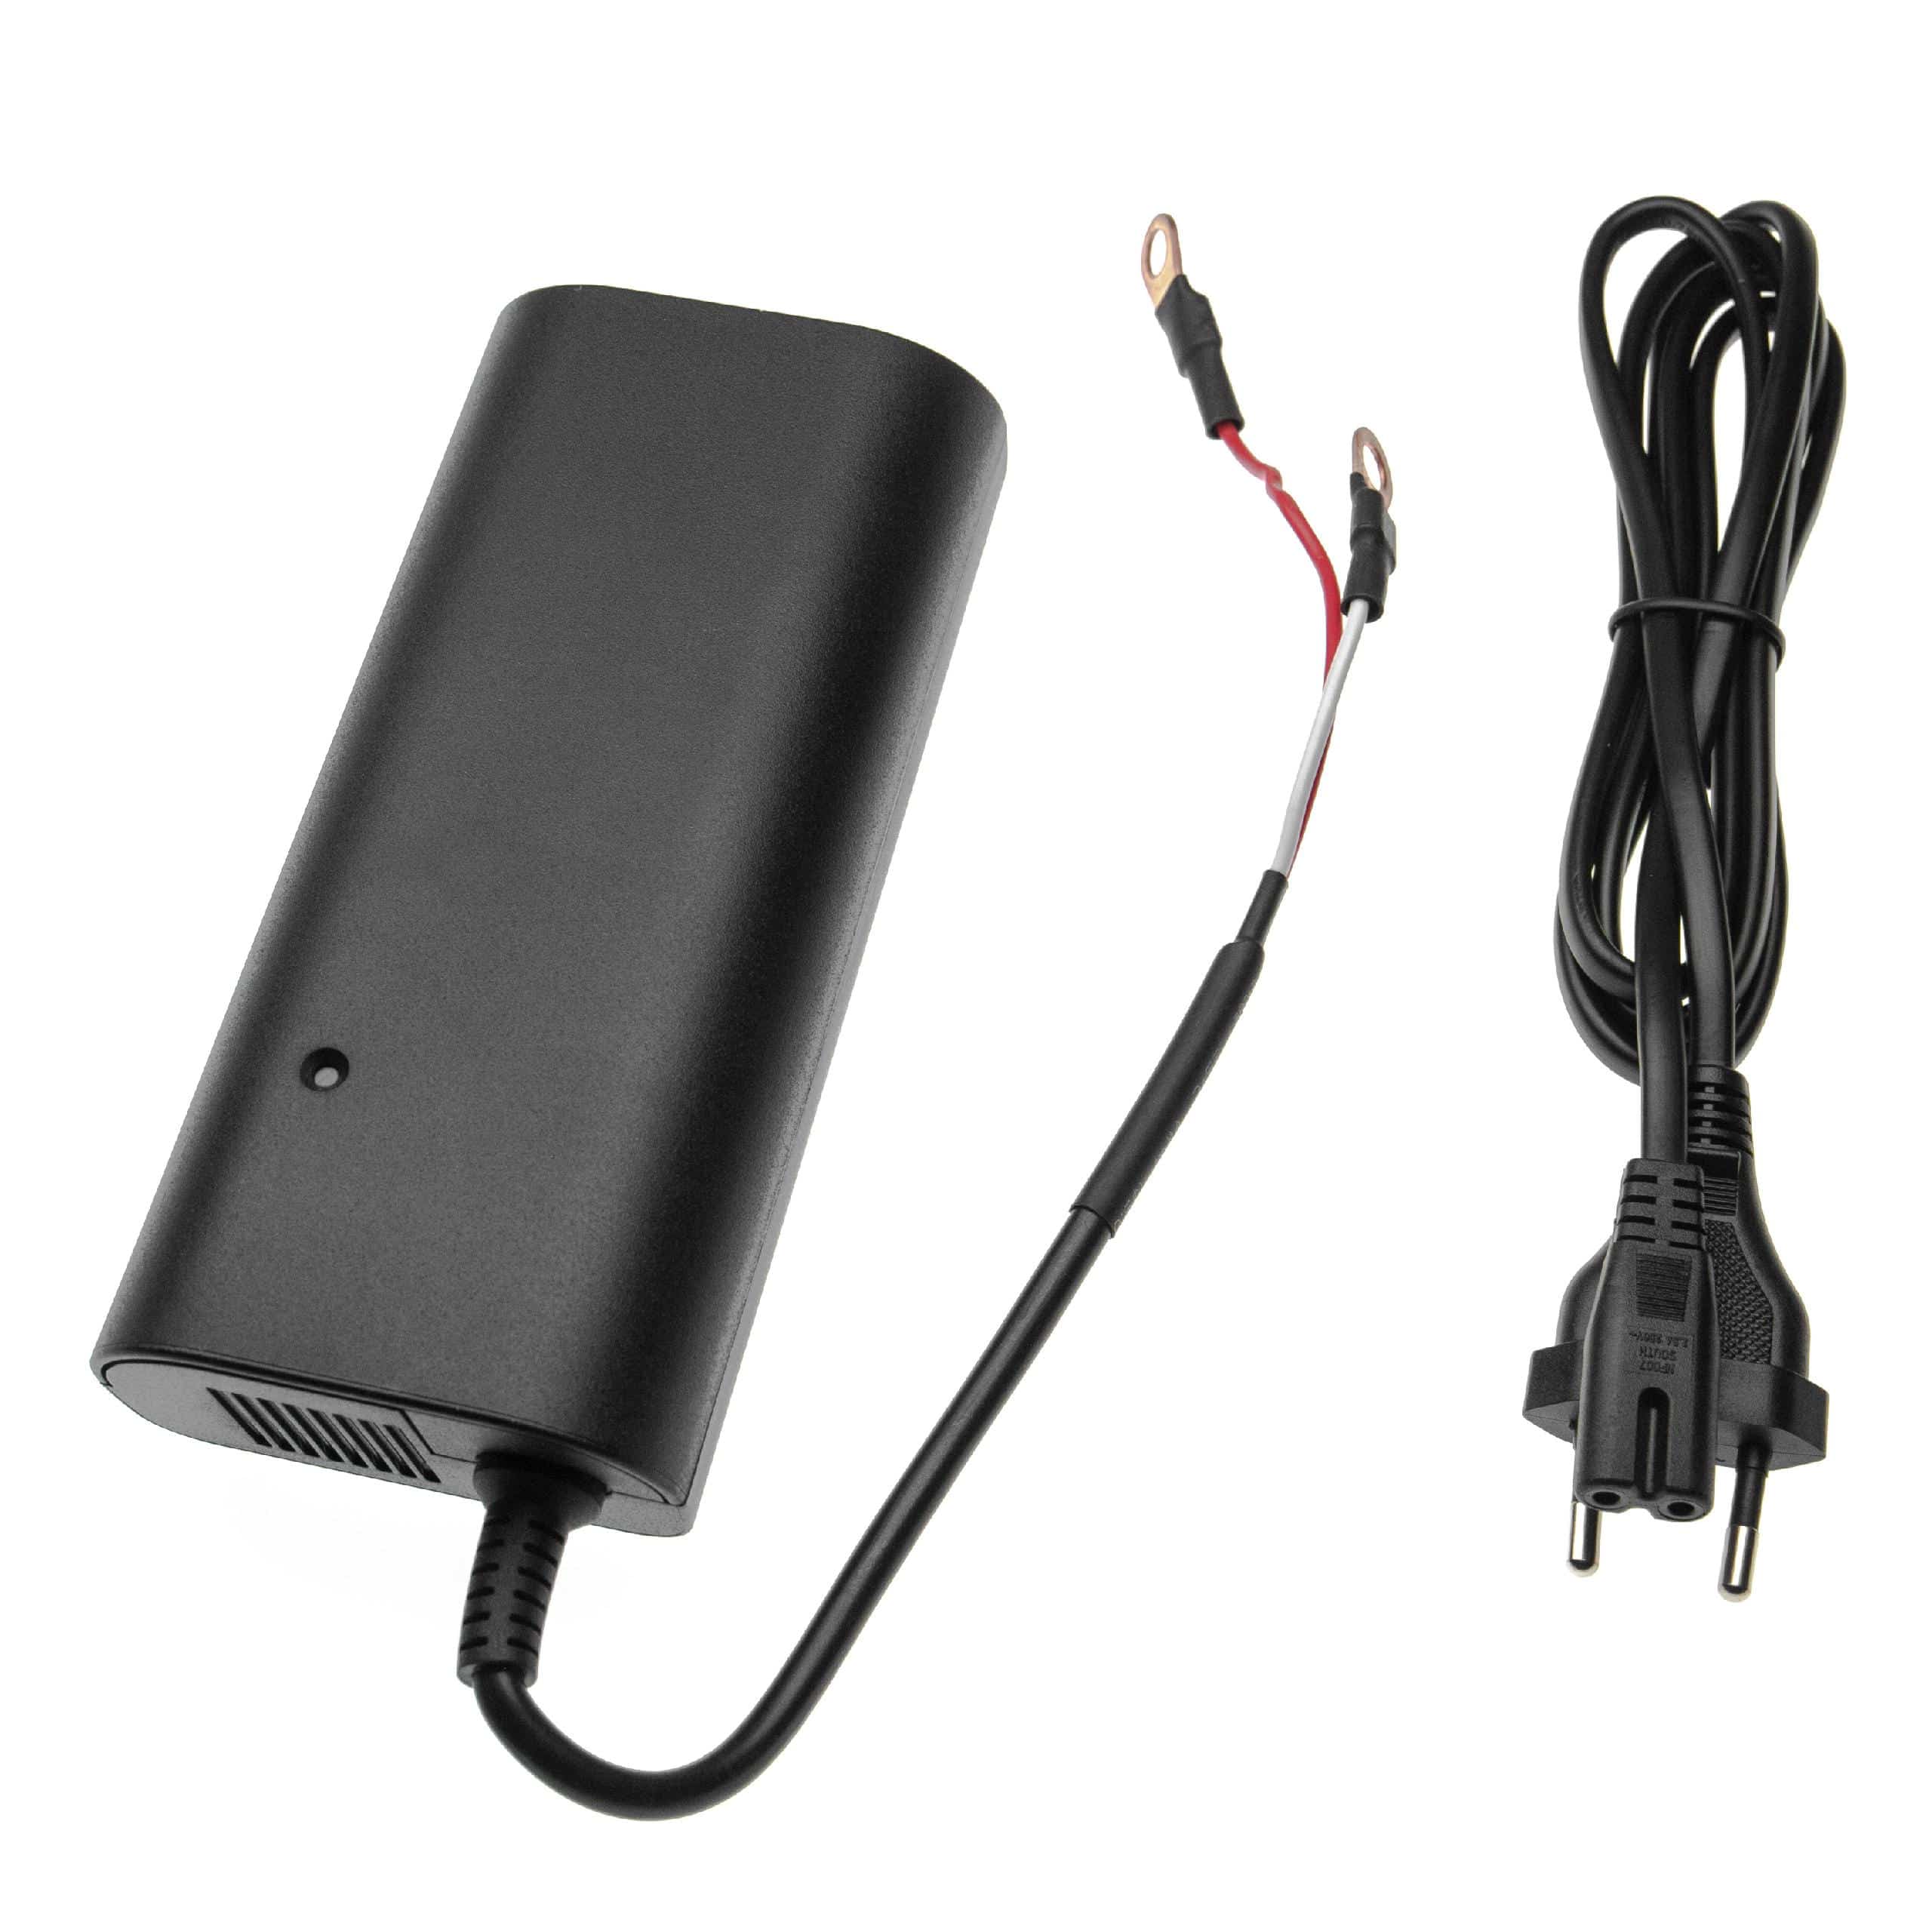 Charger suitable for LiFePO4 Batteries (12.8 V) - with LED Indicator